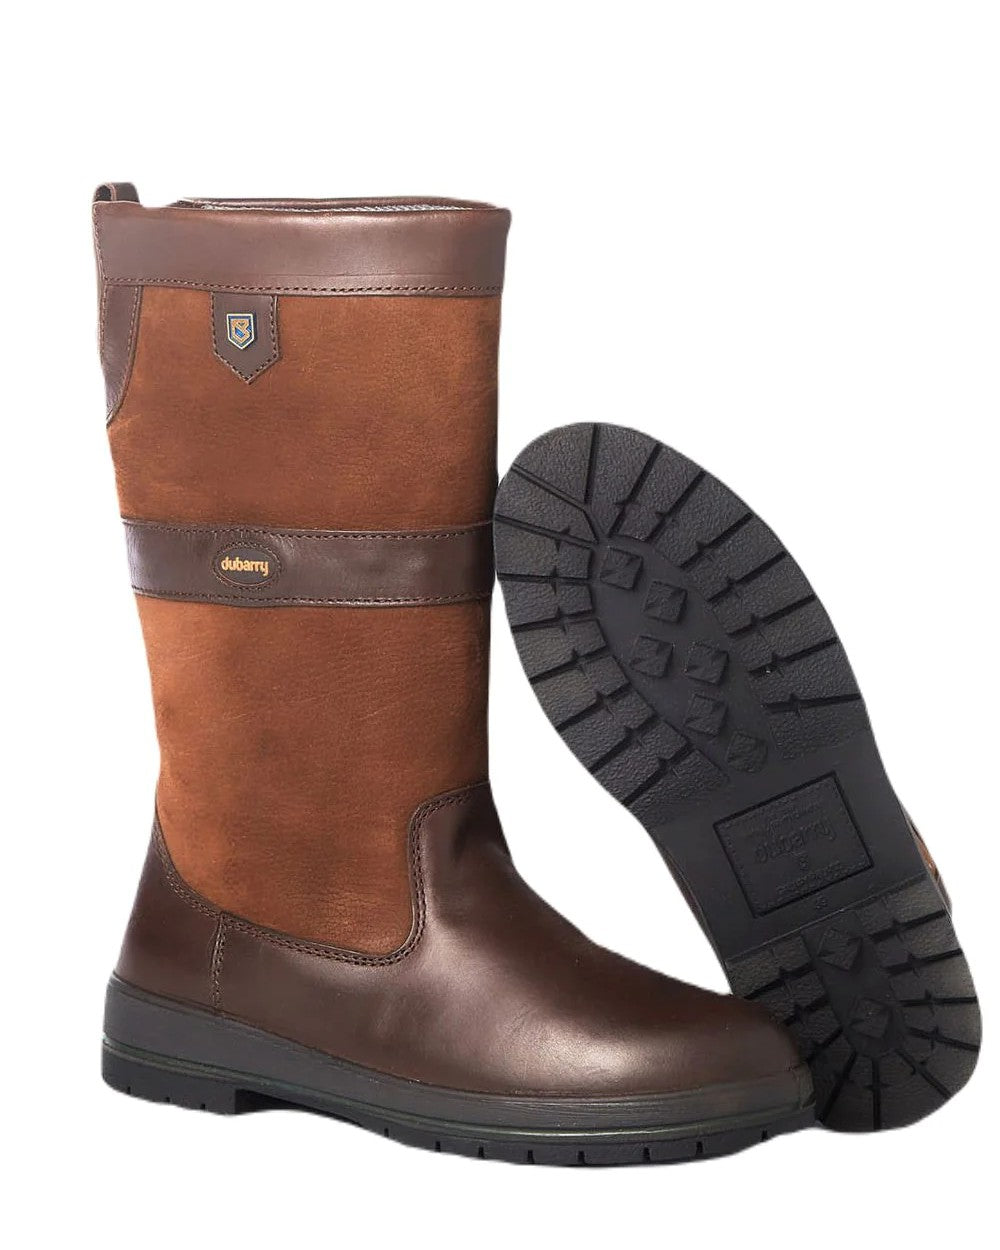 Dubarry Kildare Country Boots in Walnut 